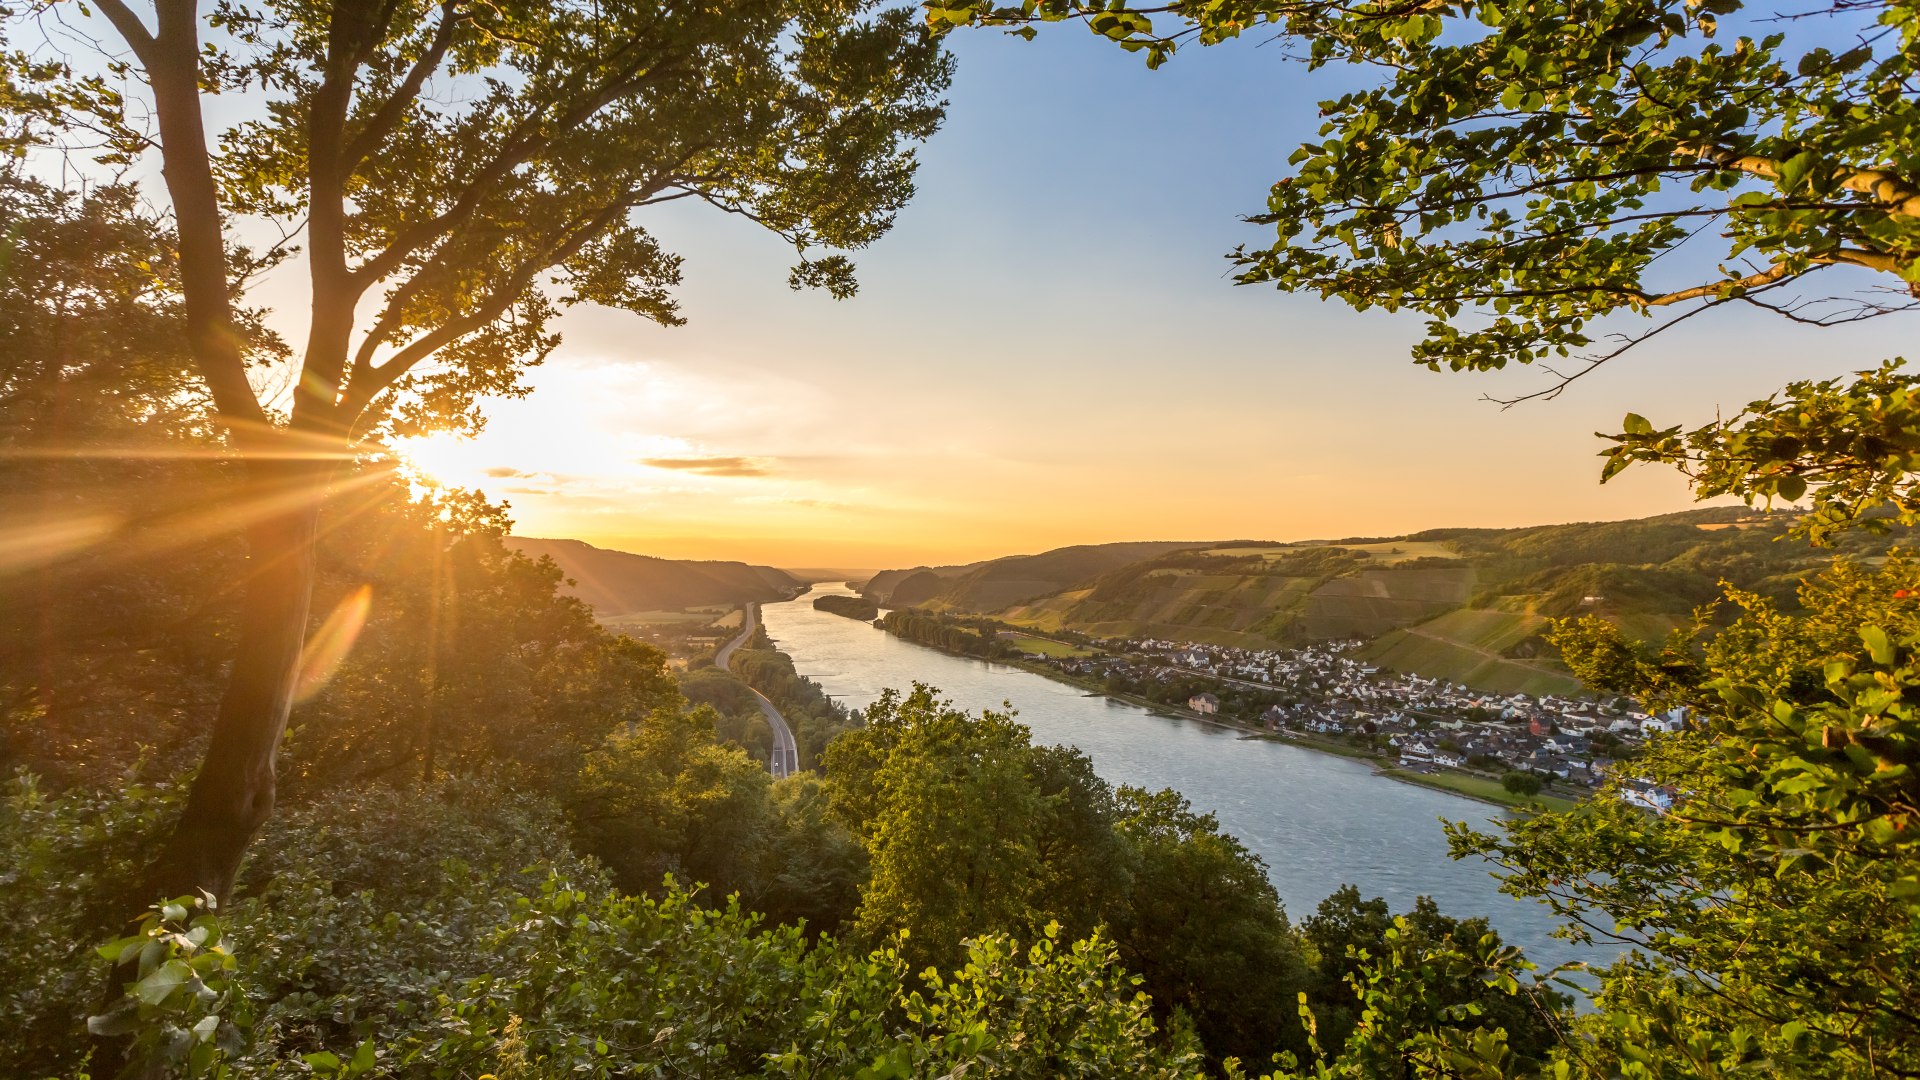 View from Krahnenberg Andernach over the Rhine valley and the vineyards of Leutesdorf | © Andernach.net GmbH / 90Grad Photography